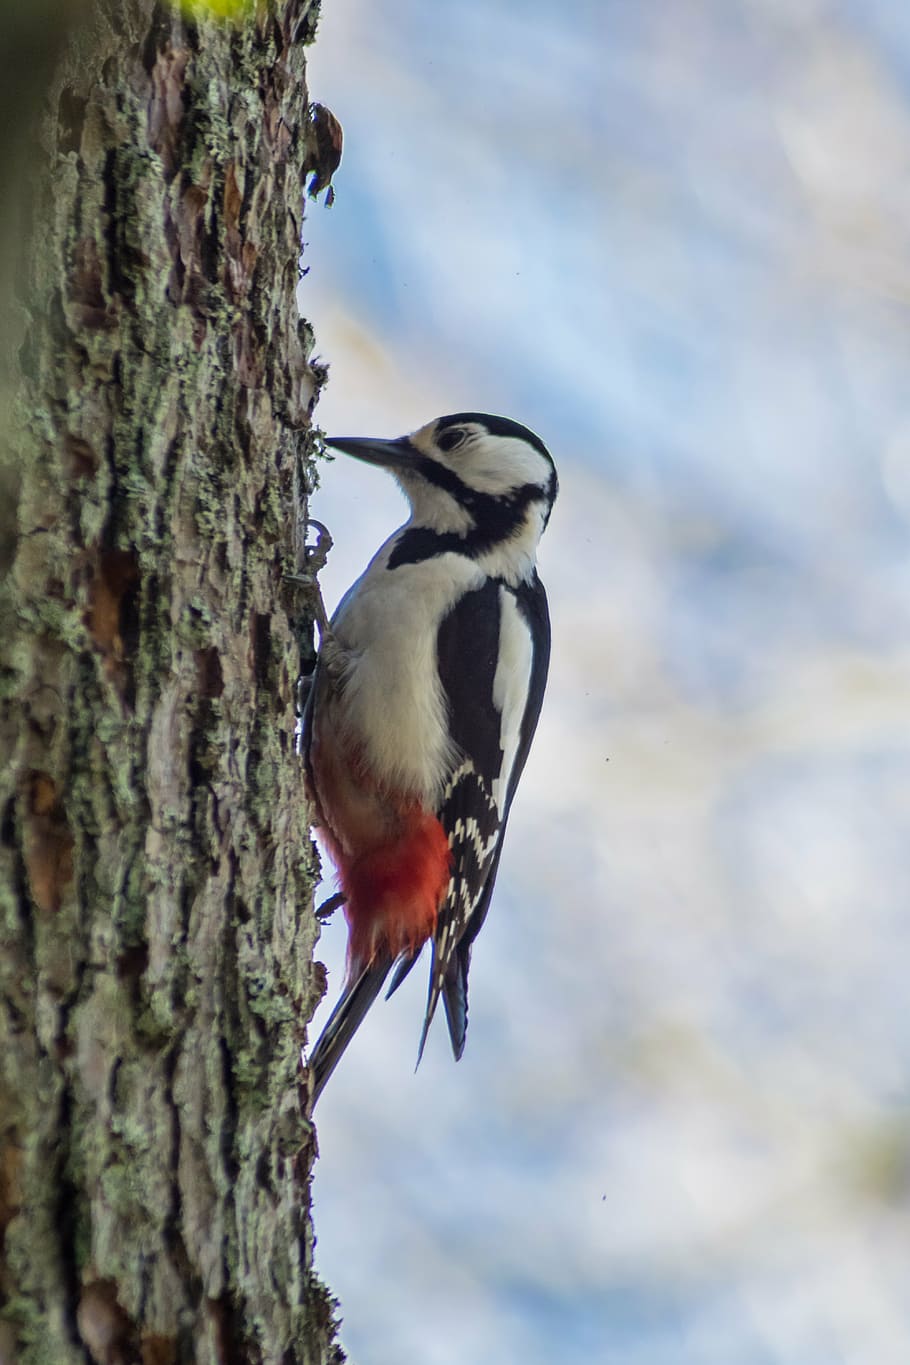 a great spotted woodpecker, woodpecker, bird, nature, nature photo, animals in the wild, animal, animal wildlife, animal themes, perching